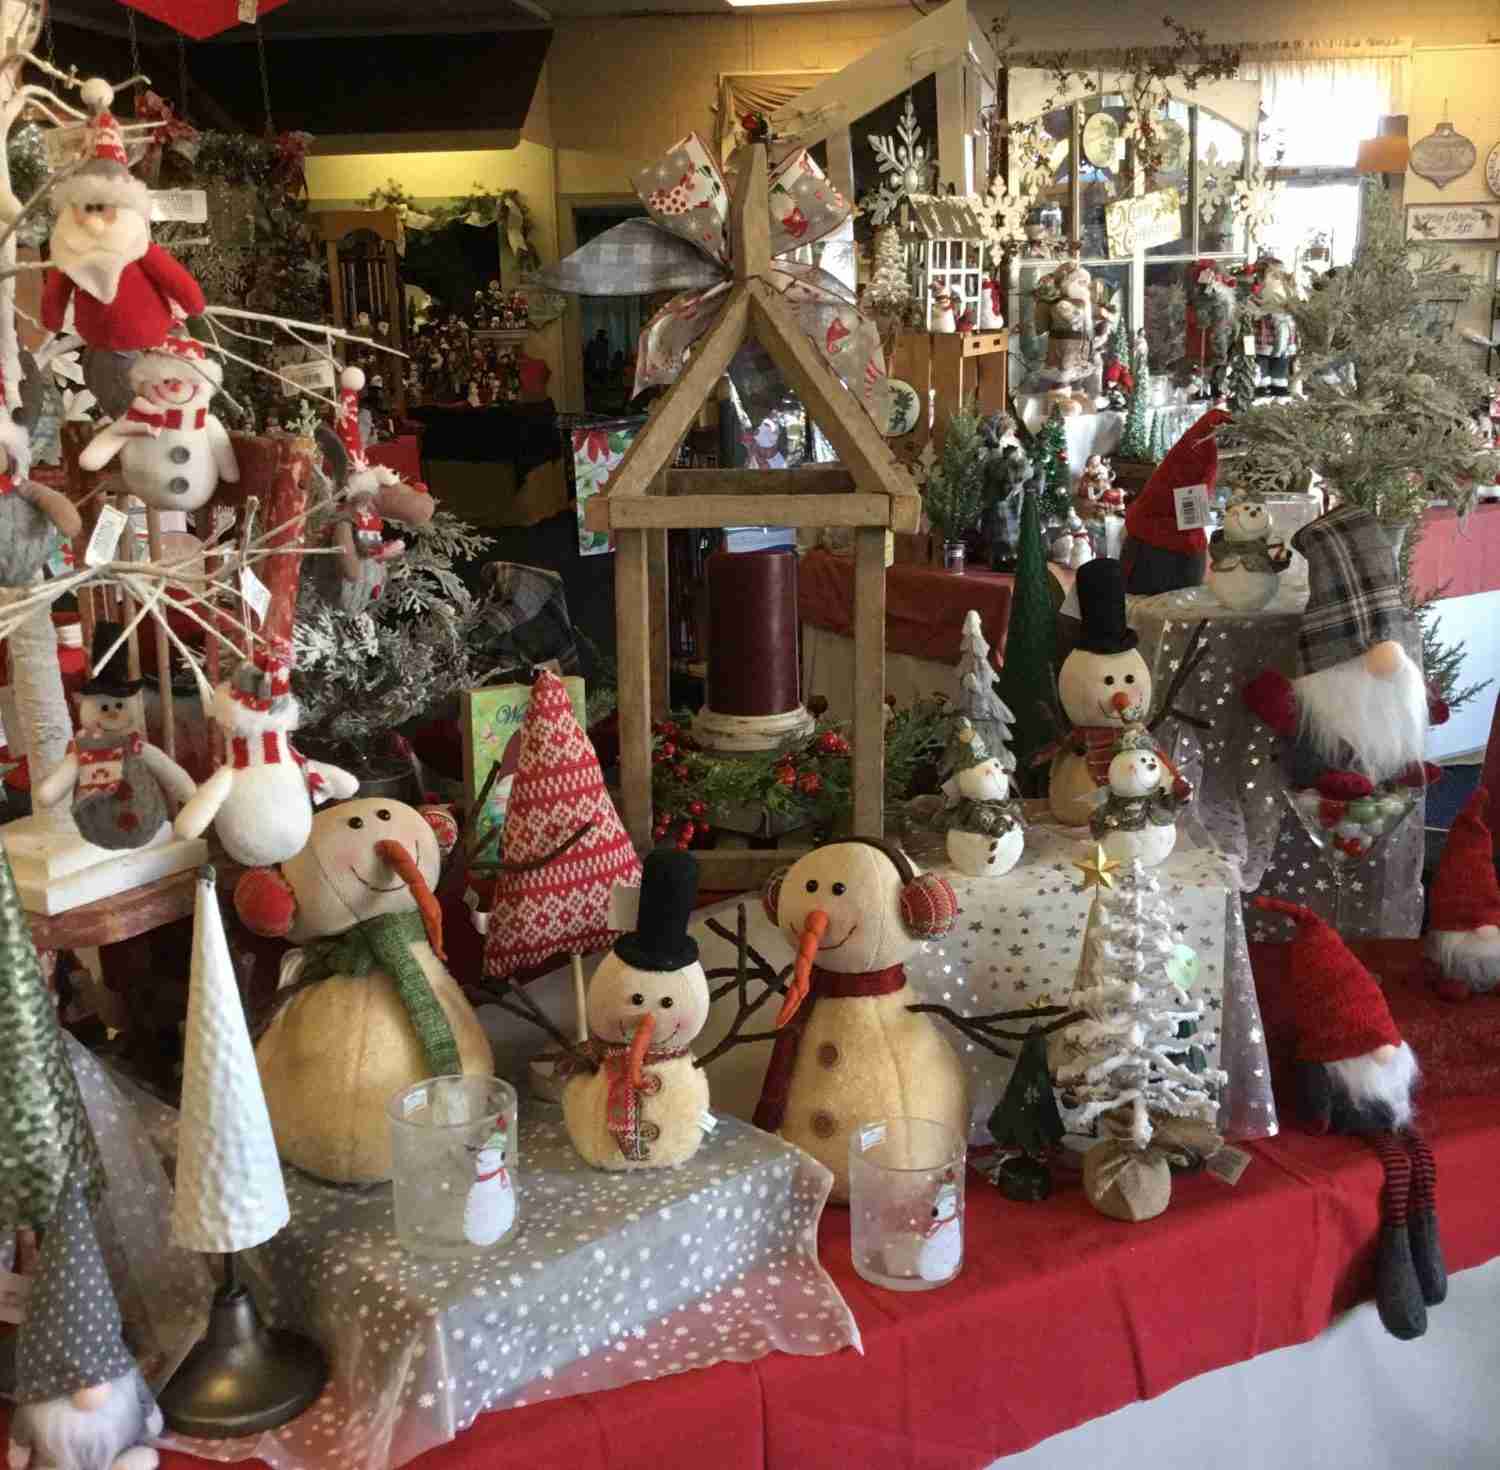 Where the Merchandise Selection Is Coming  Up Roses – Outdoor, Garden and Quality  Gifts at Garden Centers